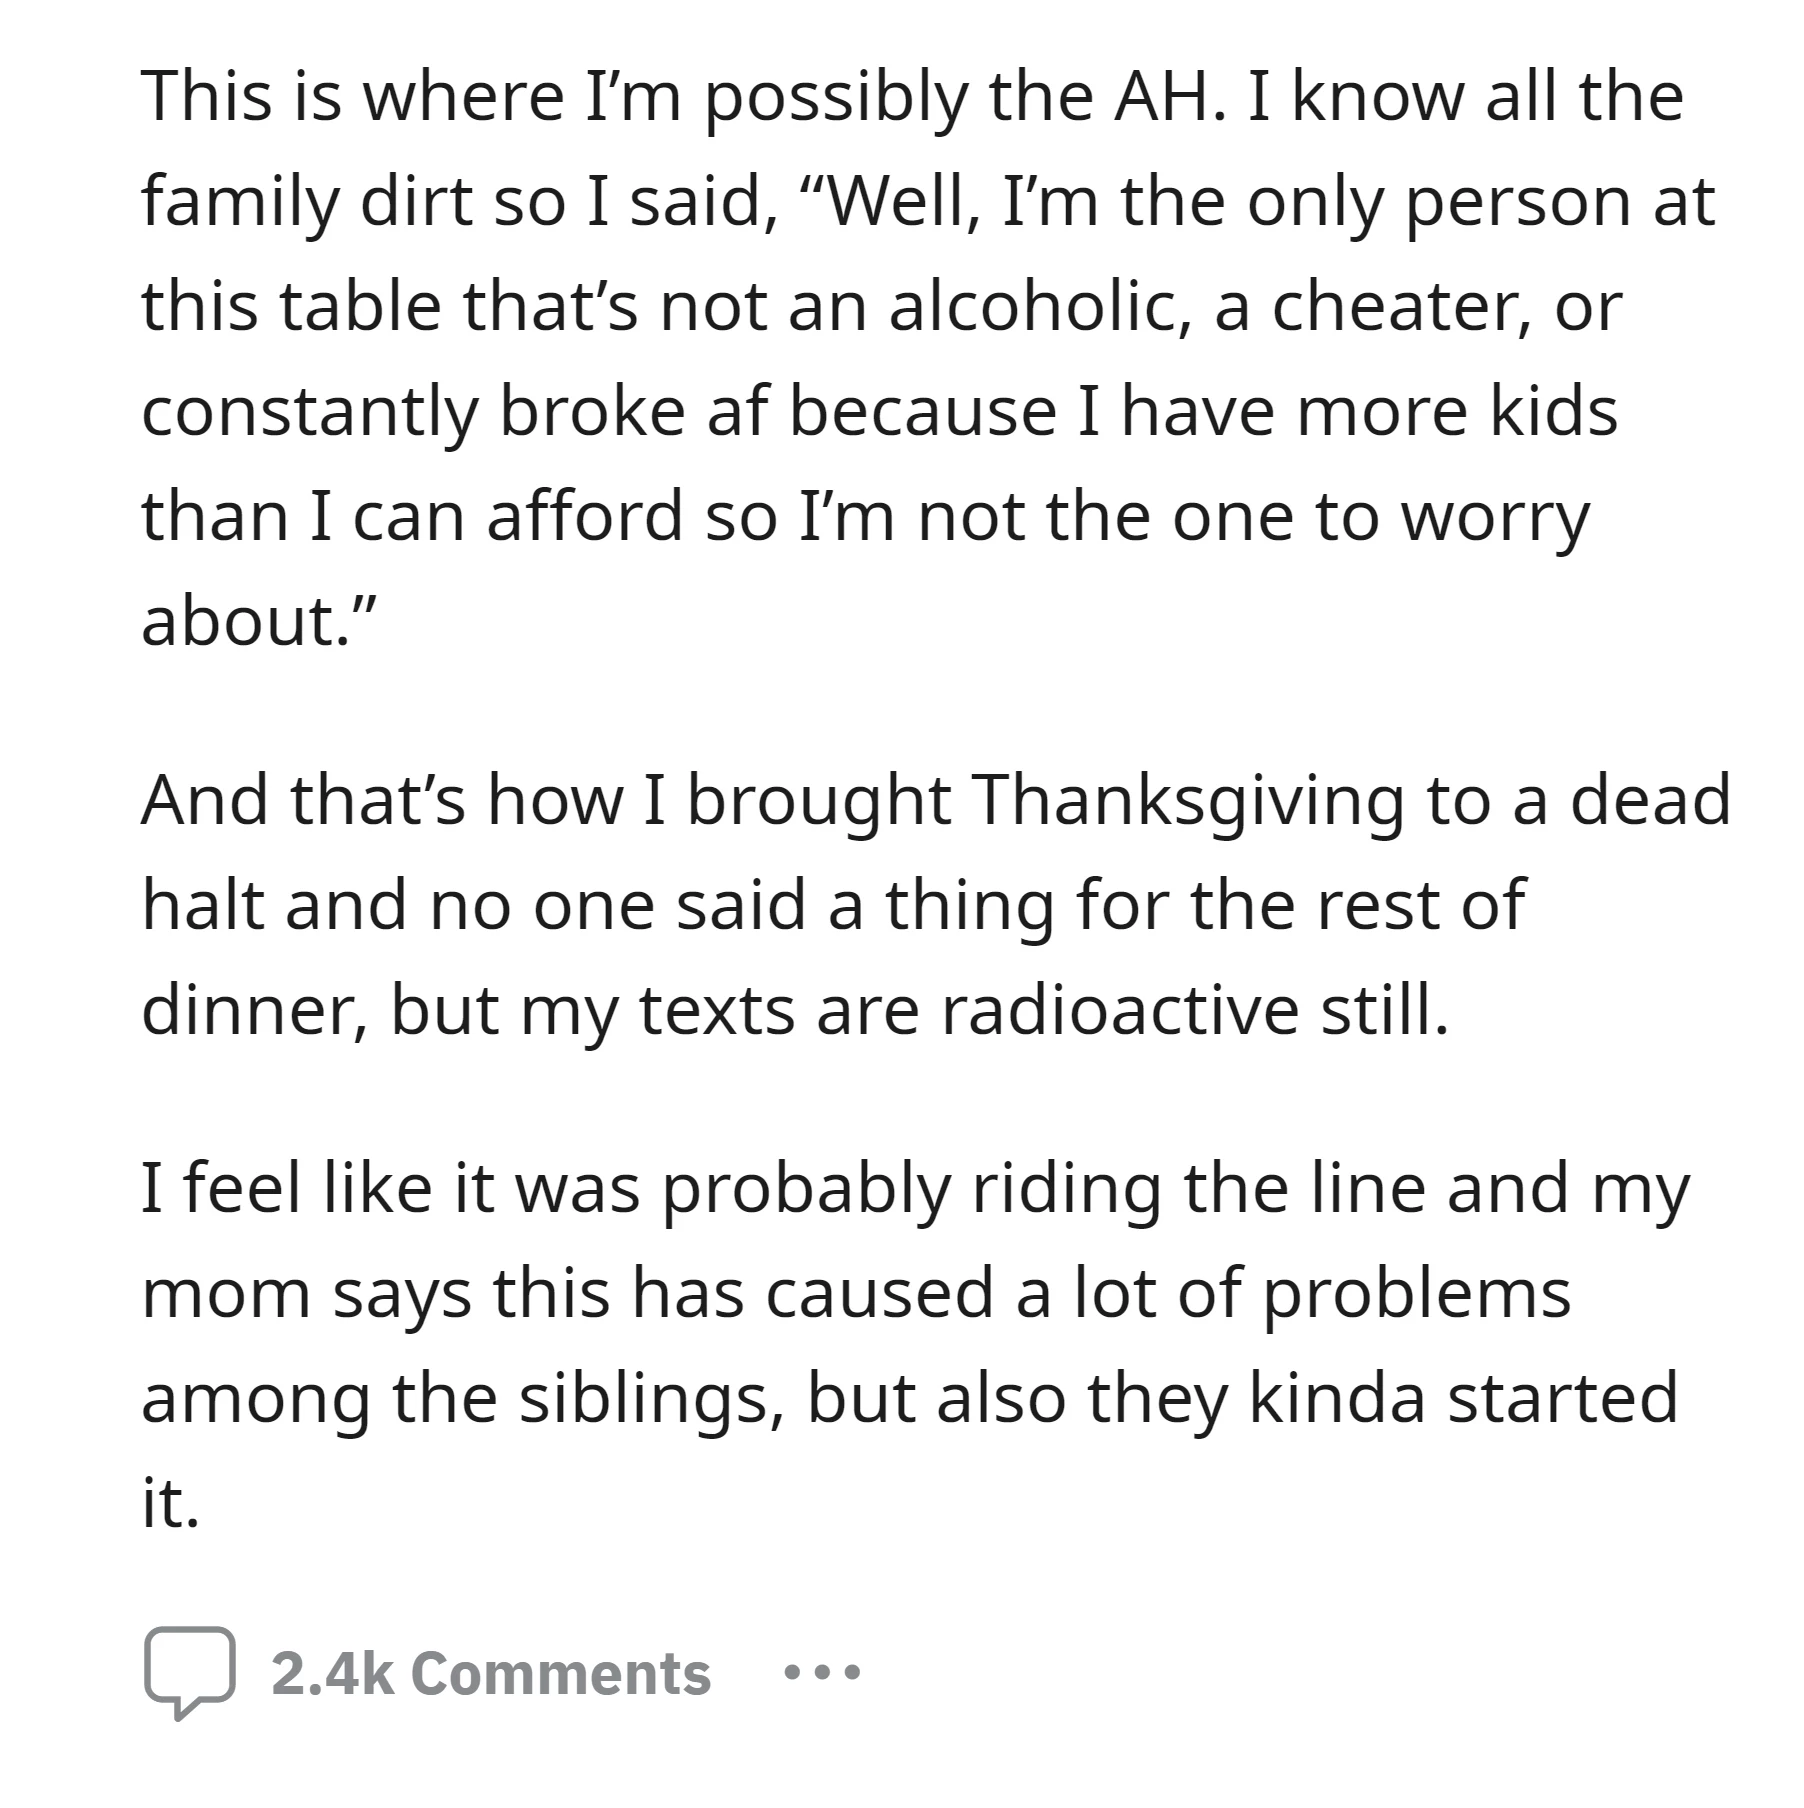 OP responded with a pointed remark about the family's issues, causing a tense atmosphere